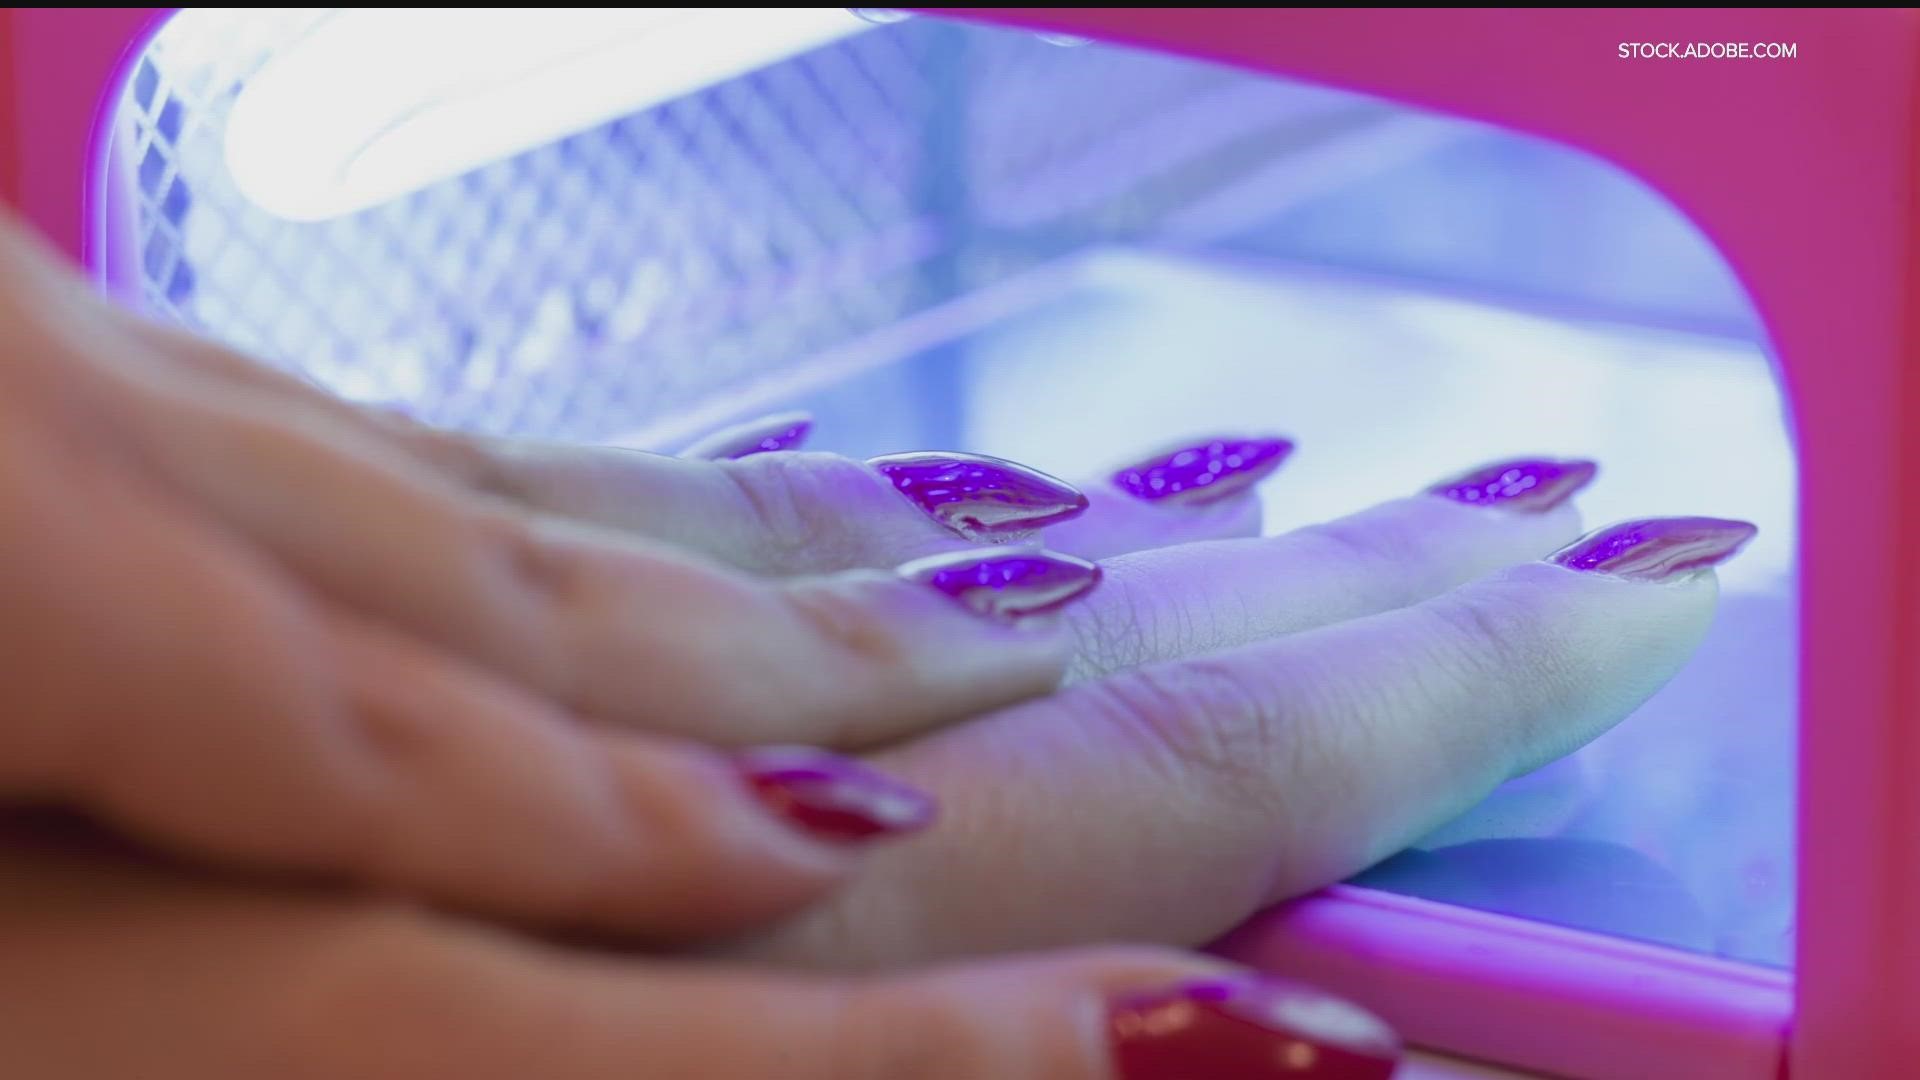 Are Gel Manicures Dangerous? New Study On UV Lamp Risks